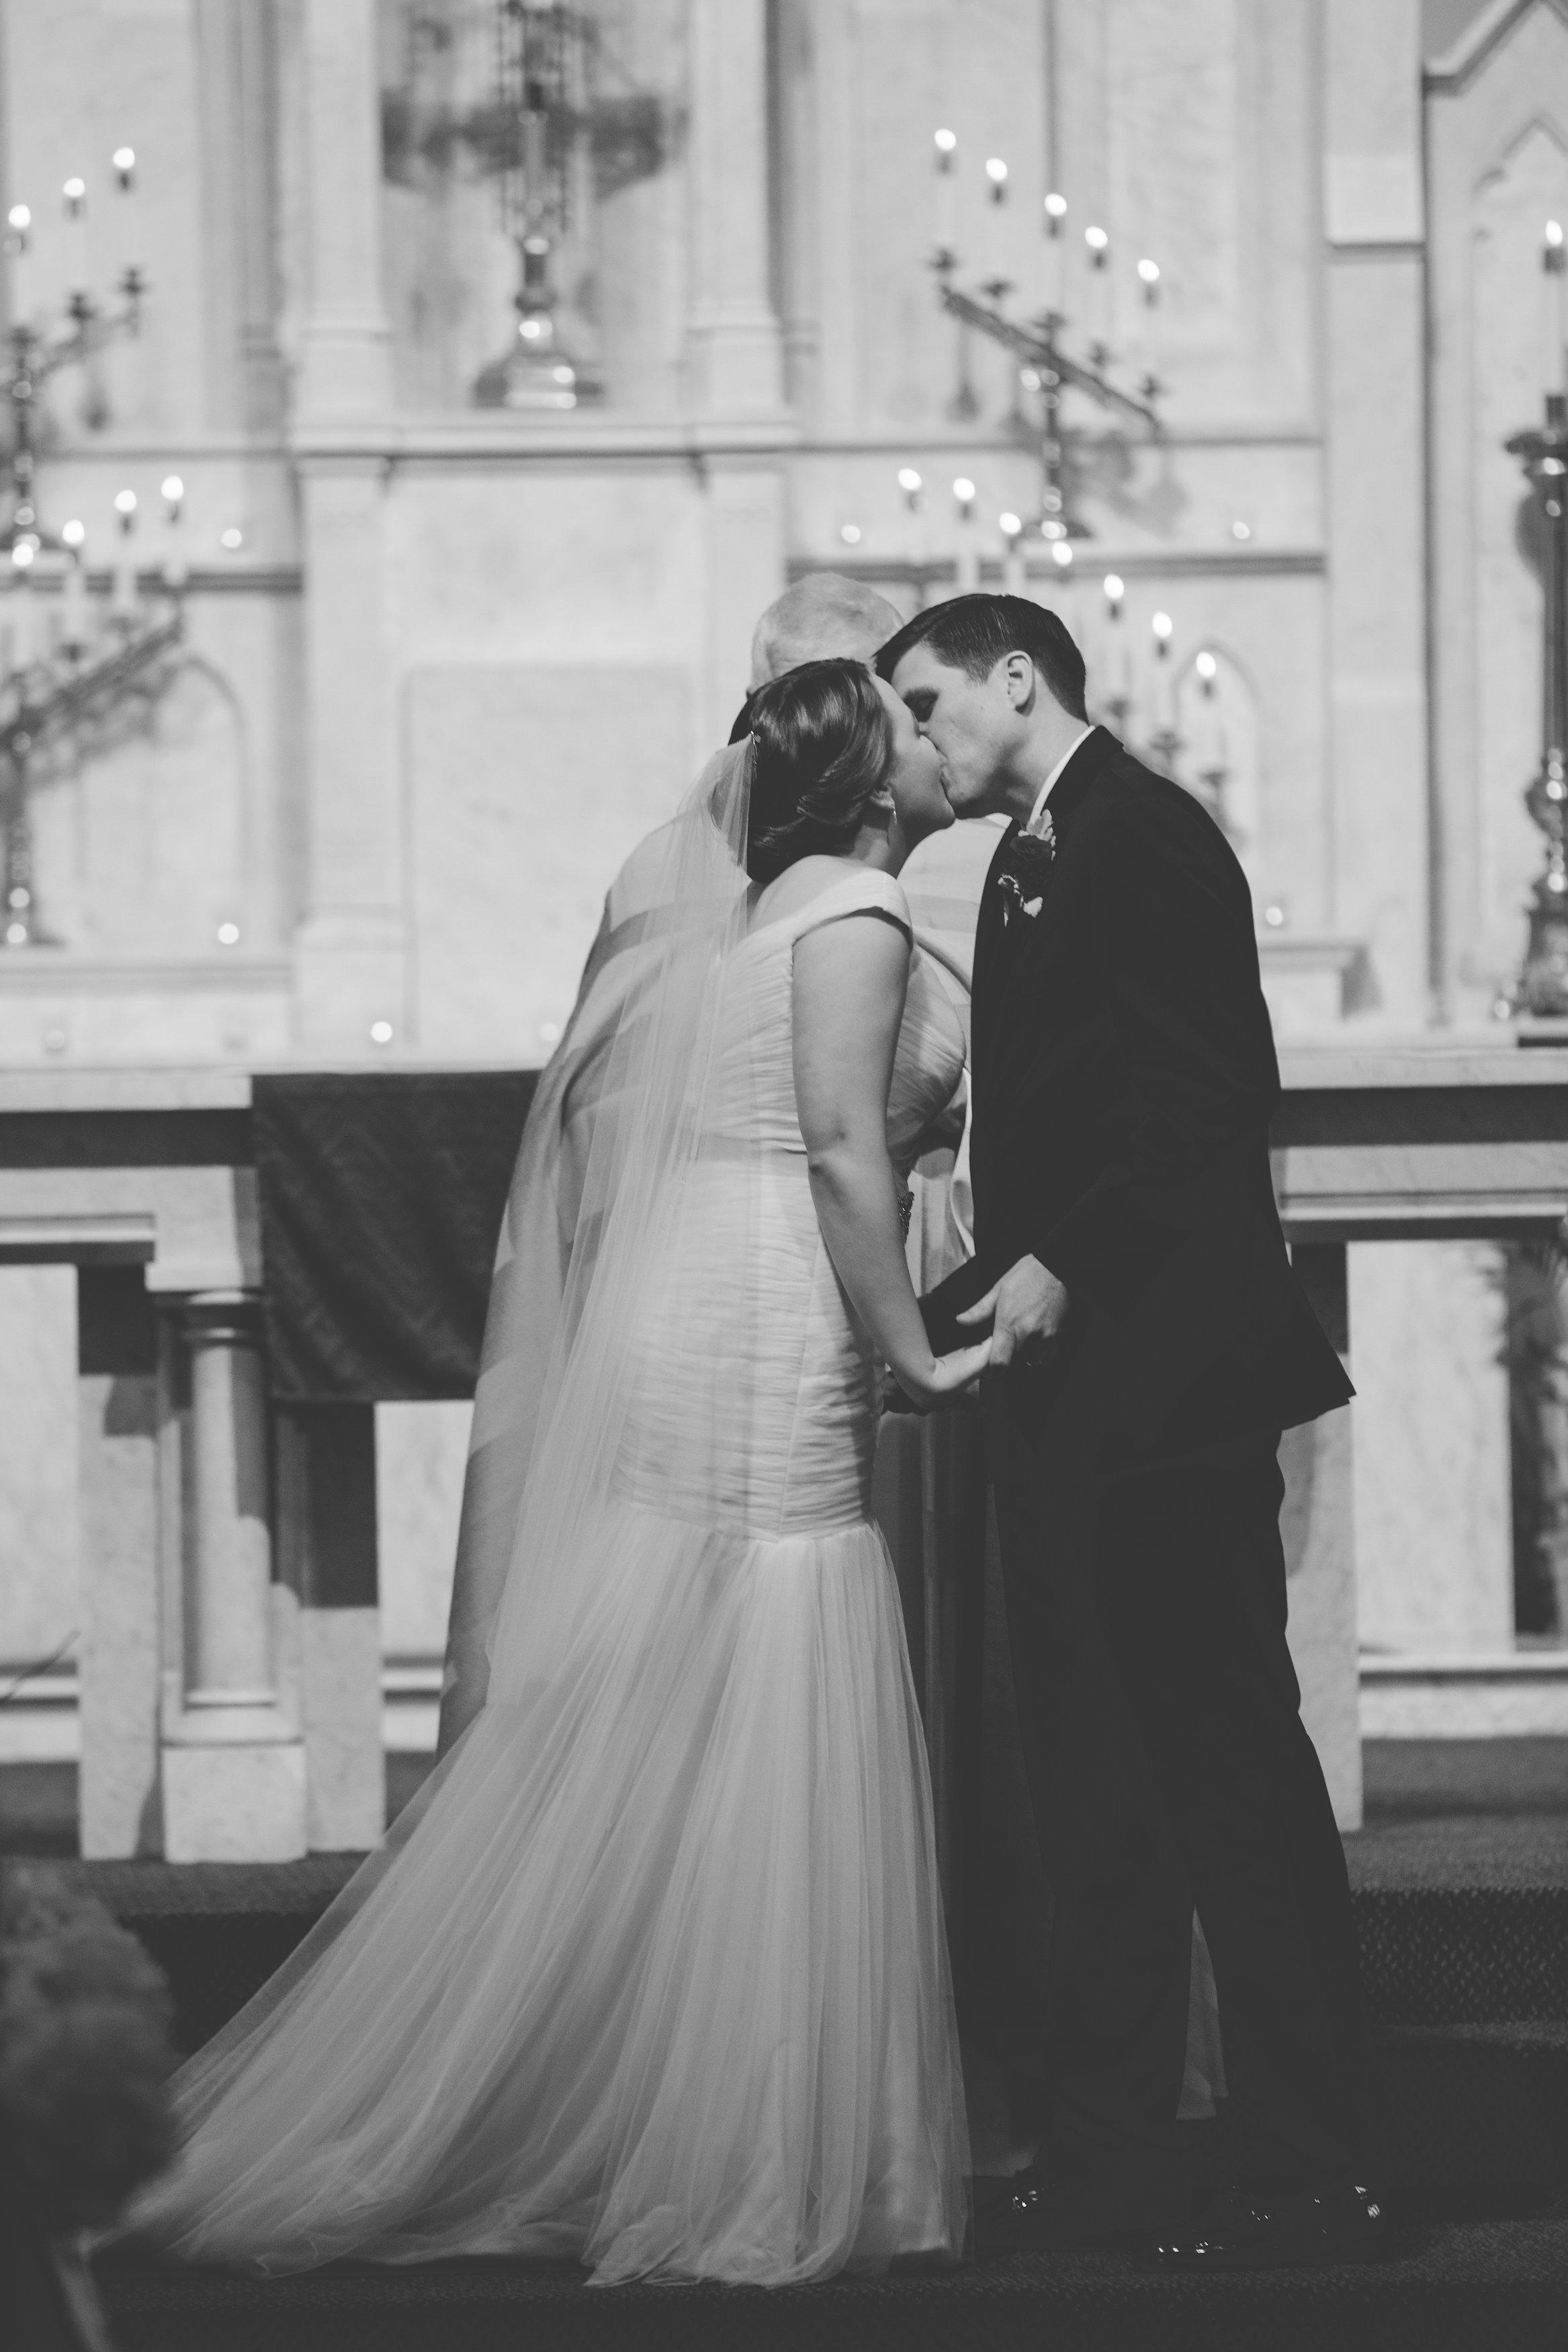 Jamie & Paul | October 24, 2015 | The Catholic Shrine of Immaculate Conception | Atlanta, Georgia | Stacey Bode Photography